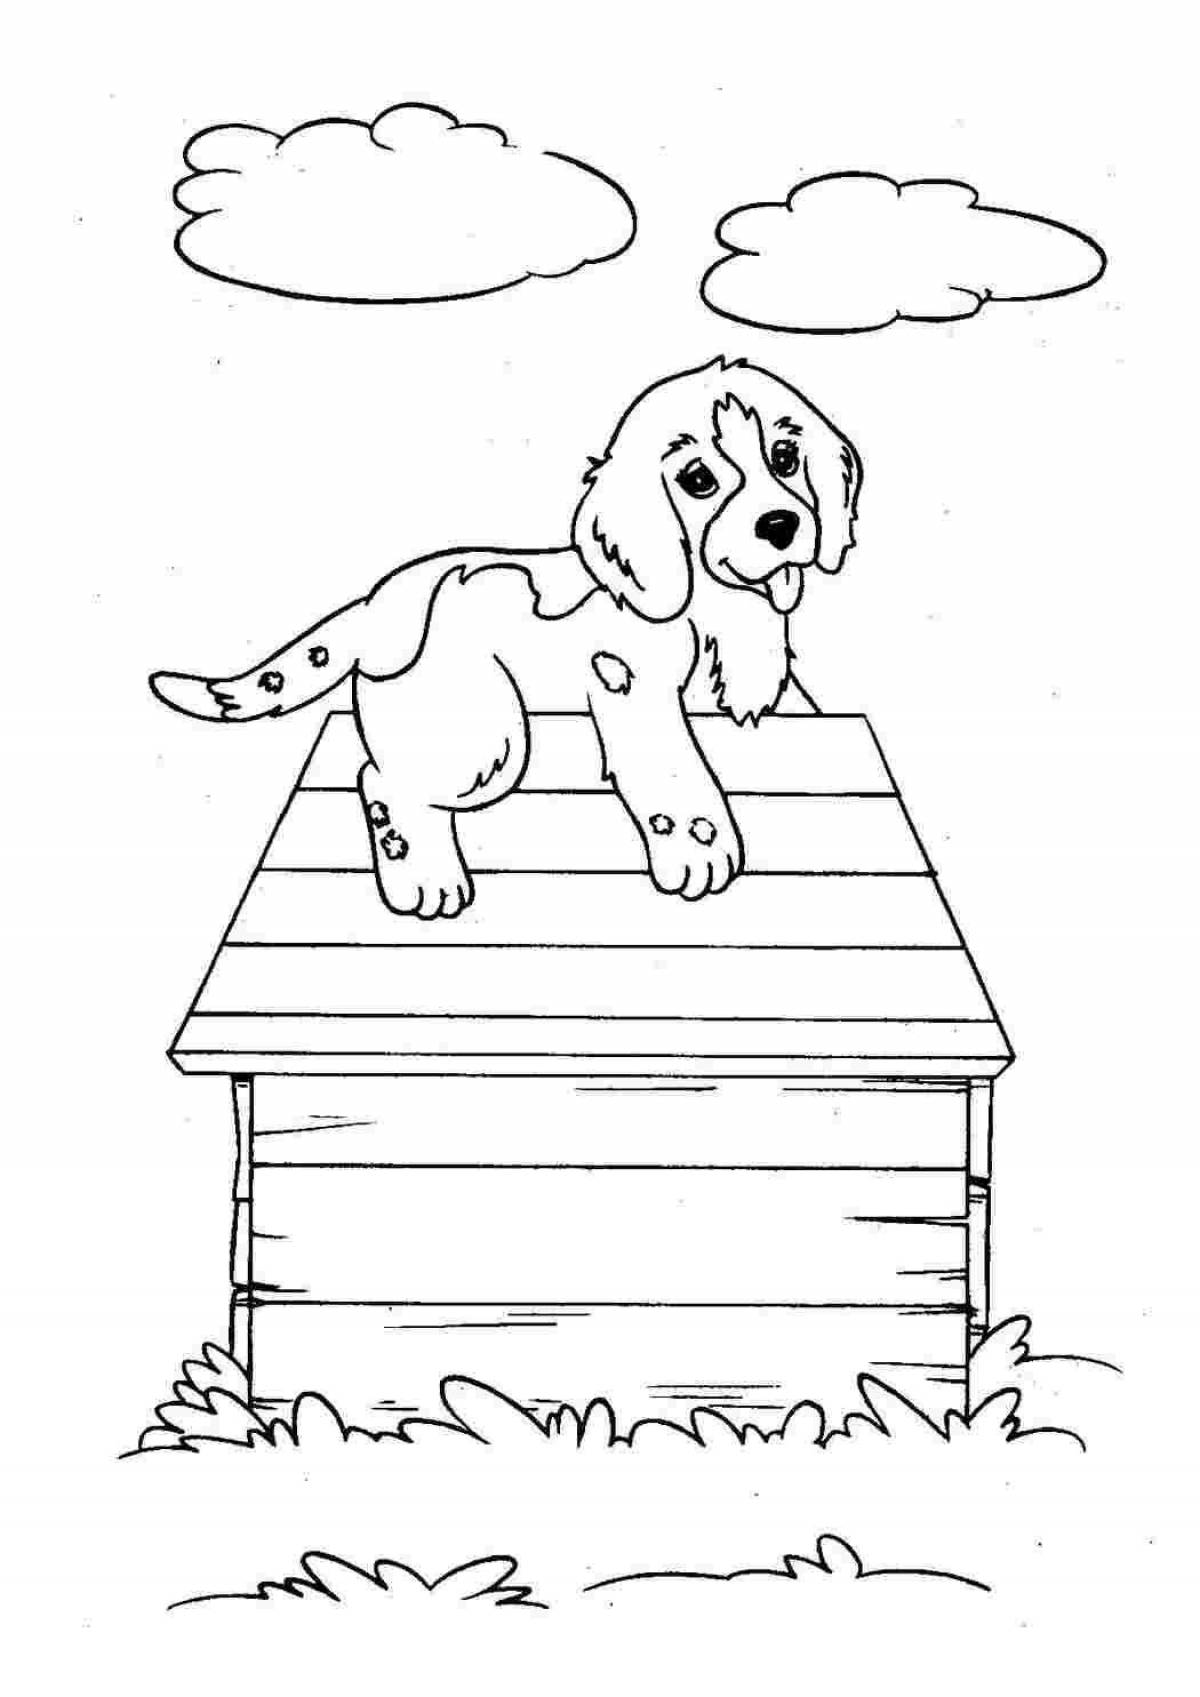 Colorful doghouse coloring book for kids